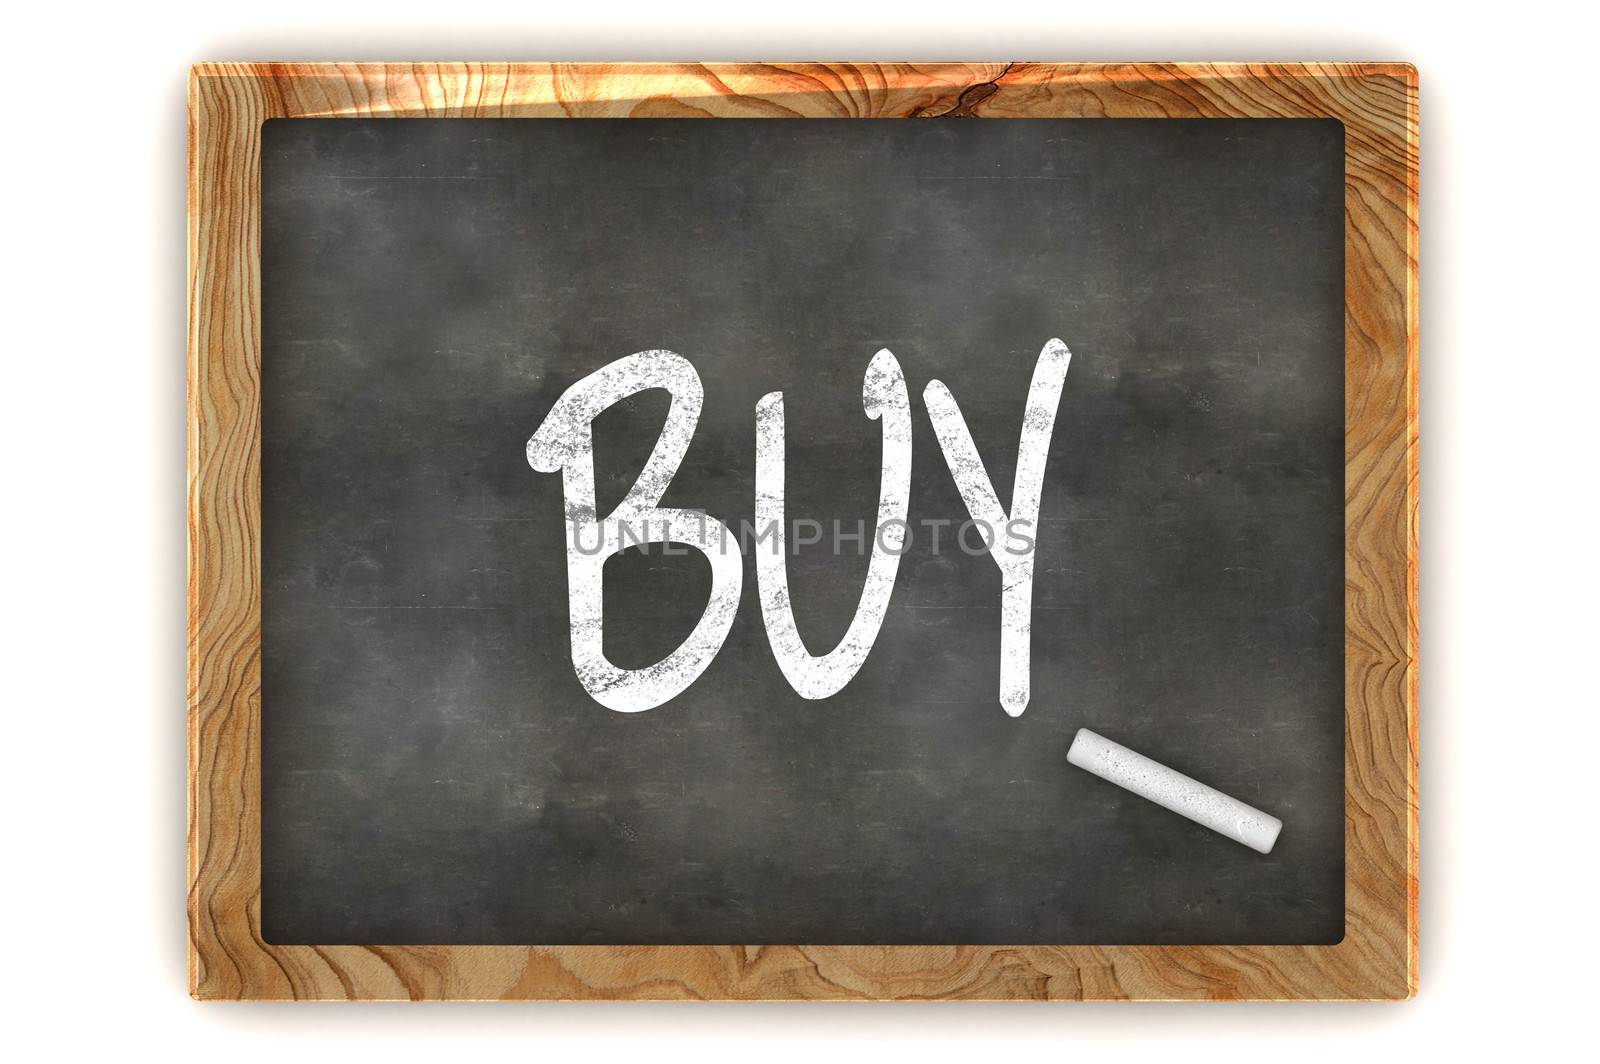 A Colourful 3d Rendered Illustration of a Blackboard Showing Buy 